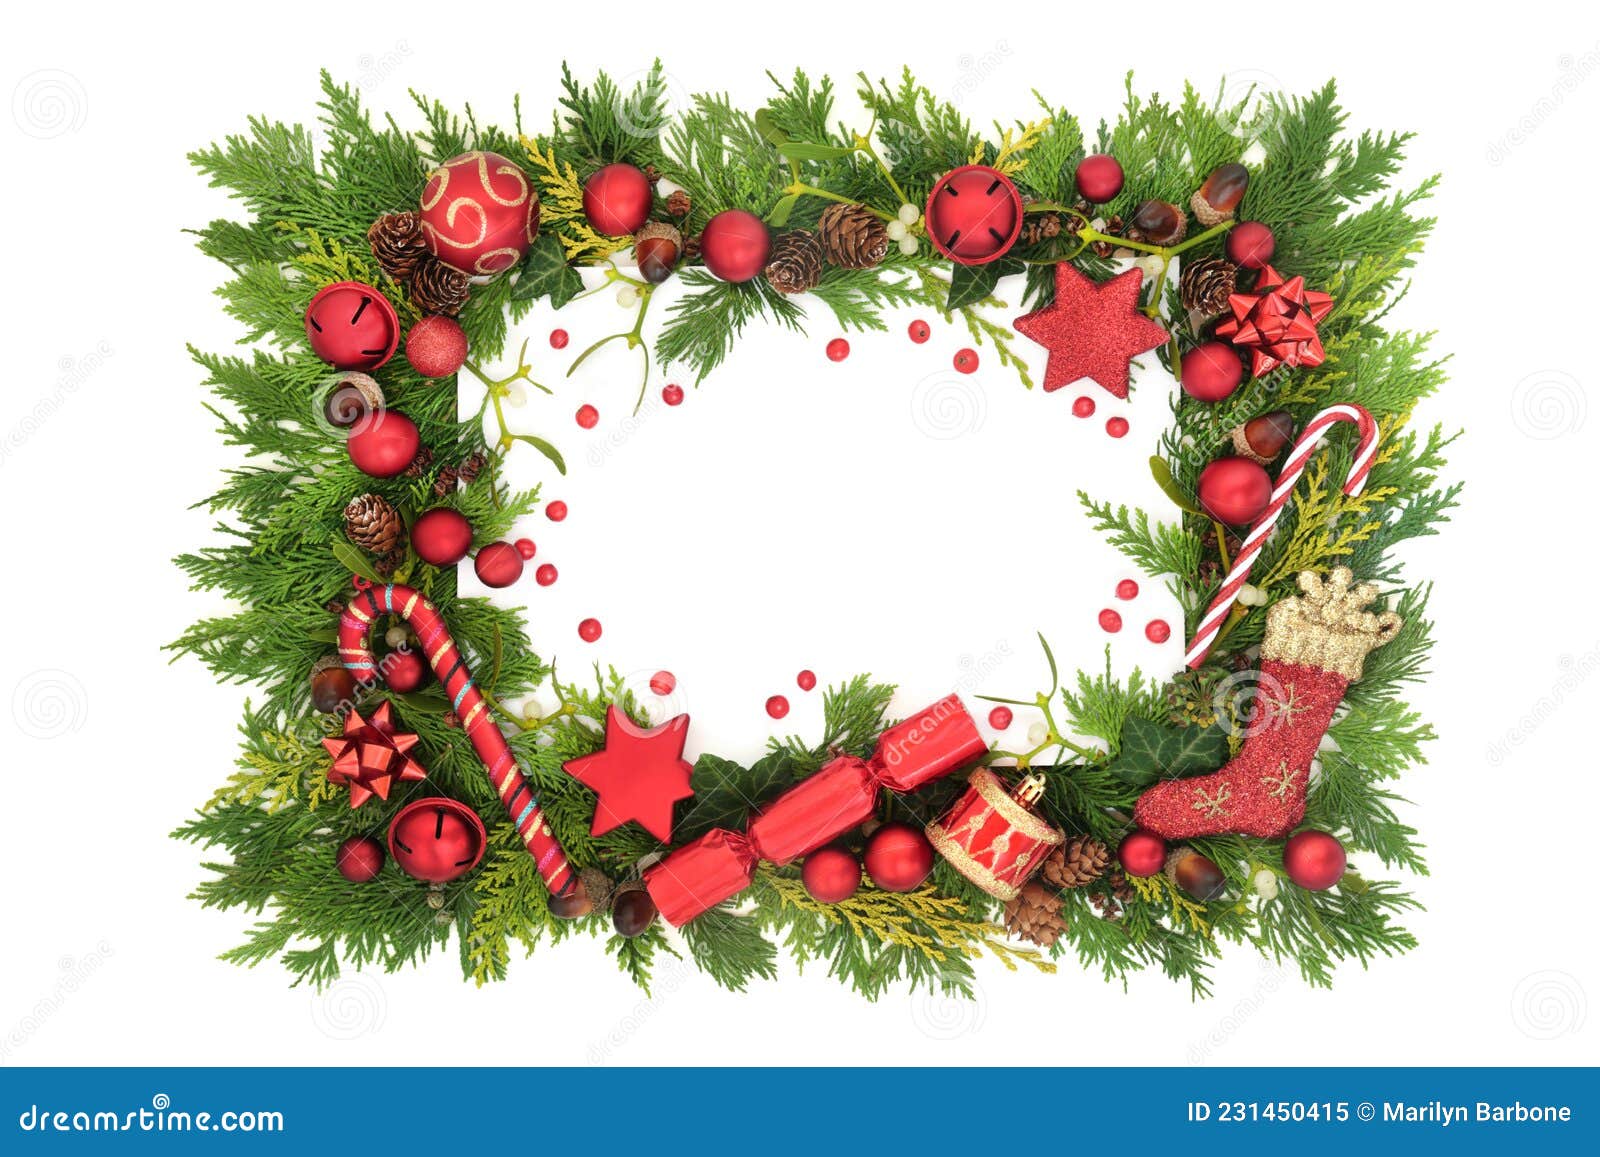 11,527 Christmas Greenery Stock Photos - Free & Royalty-Free Stock Photos  from Dreamstime